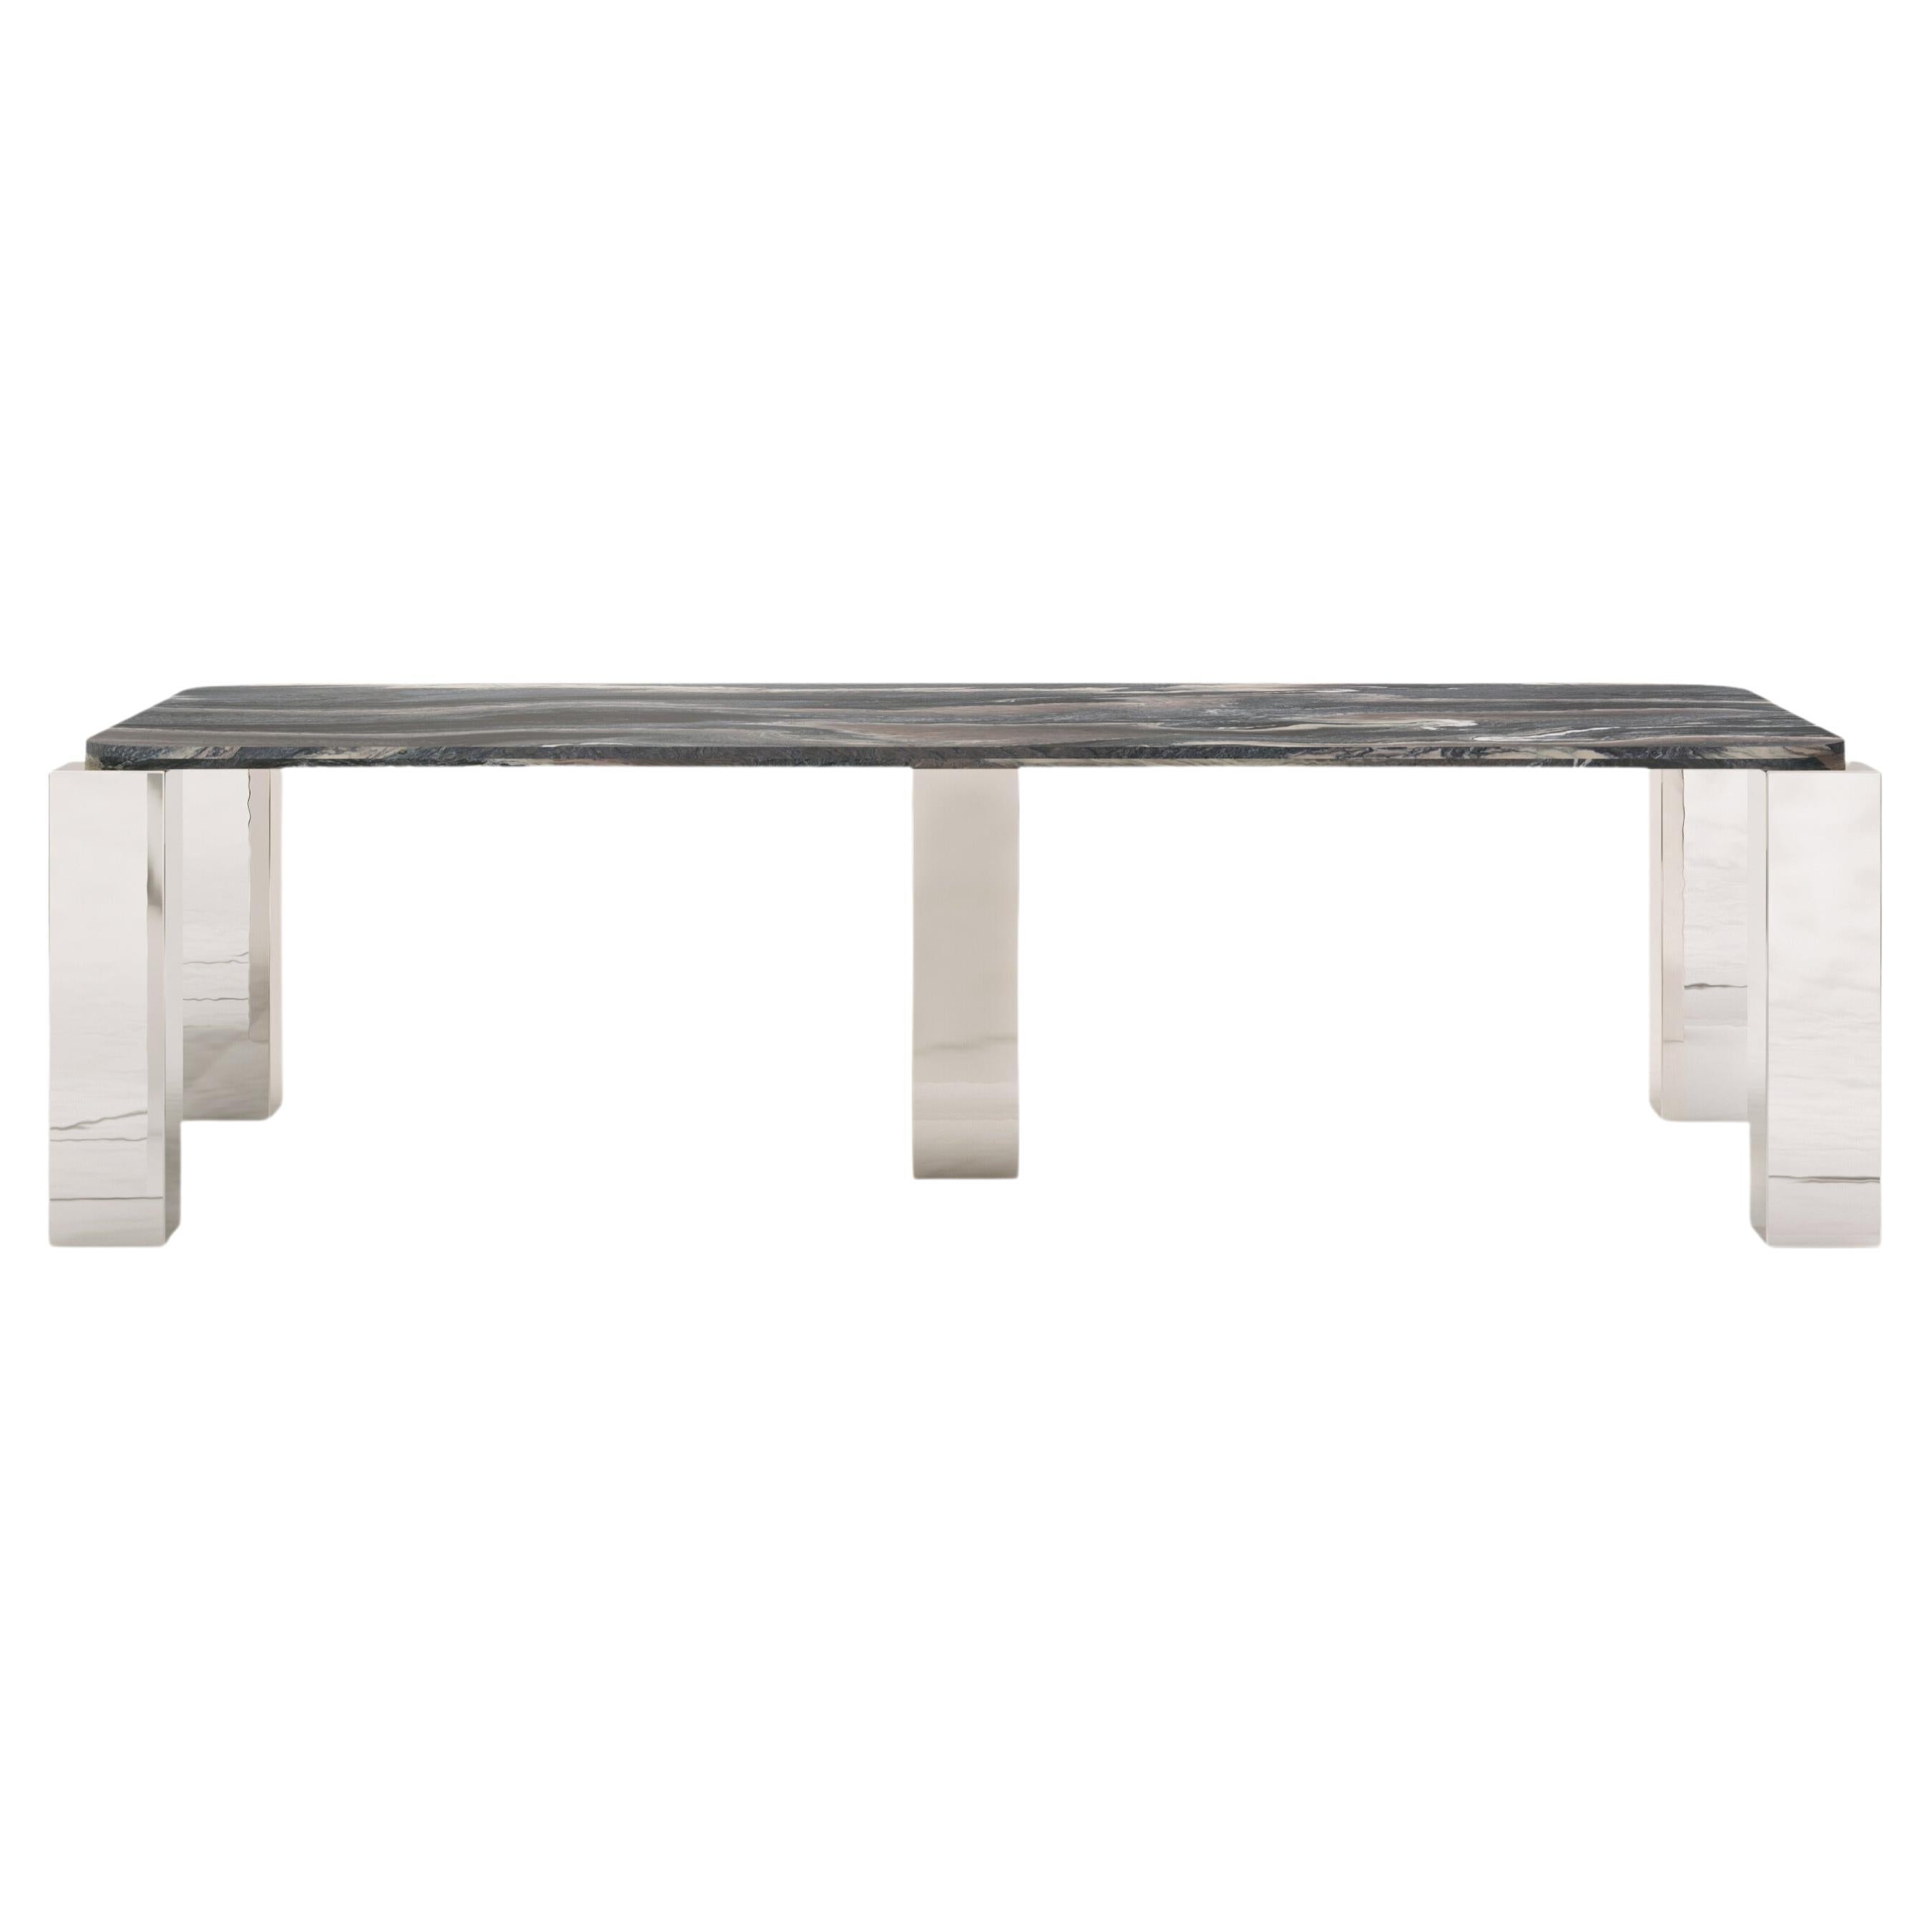 FORM(LA) Cubo Rectangle Dining Table 110”L x 50”W x 30”H Ondulato Marble/Chrome For Sale